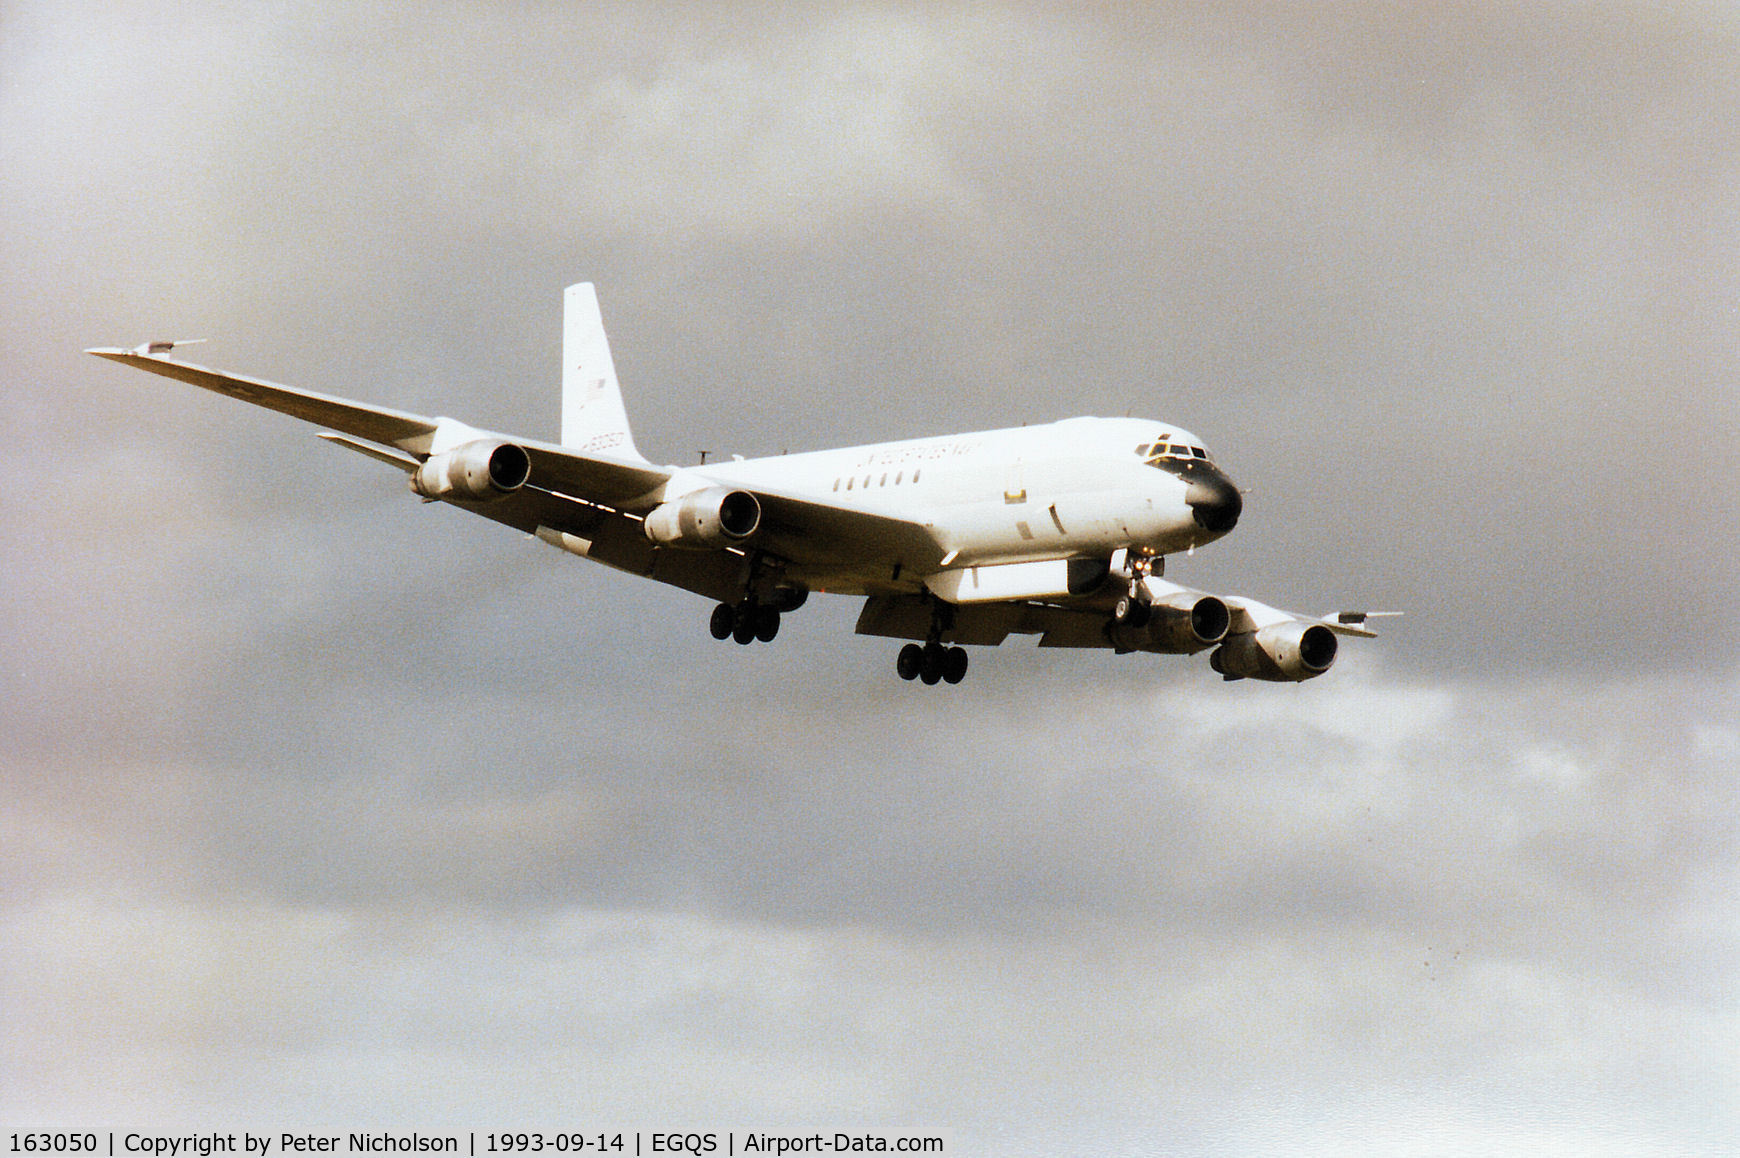 163050, 1966 McDonnell Douglas EC-24A (DC-8-54F) C/N 45881, United States Navy EC-24A turning onto final approach to Runway 05 at RAF Lossiemouth in September 1993 after an Exercise Solid Stance mission.